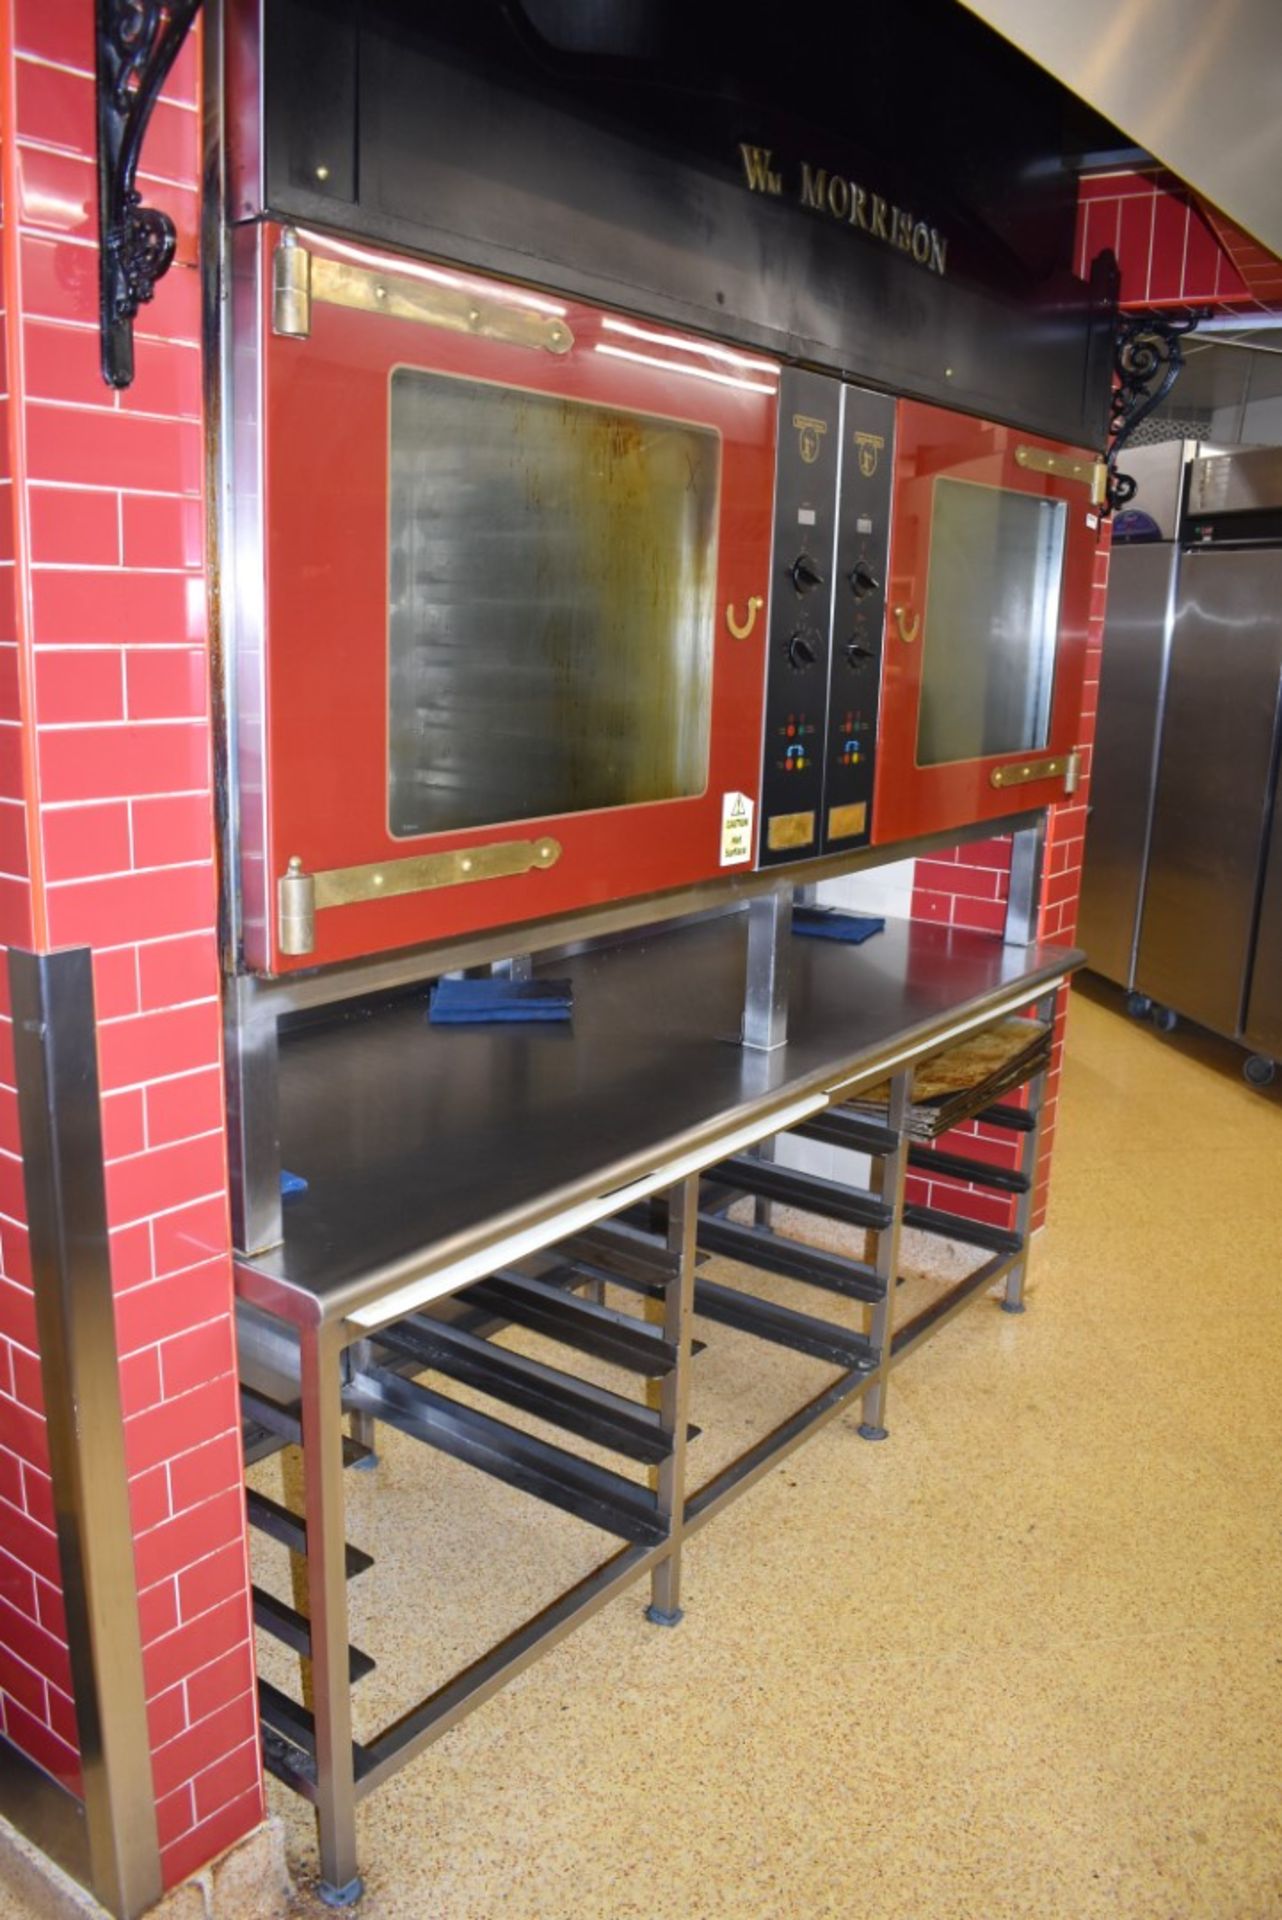 1 x Tom Chandley Double C5 60X40 Pie Oven With Stainless Steel Baking Tray Prep Bench - CL455 - - Image 12 of 18